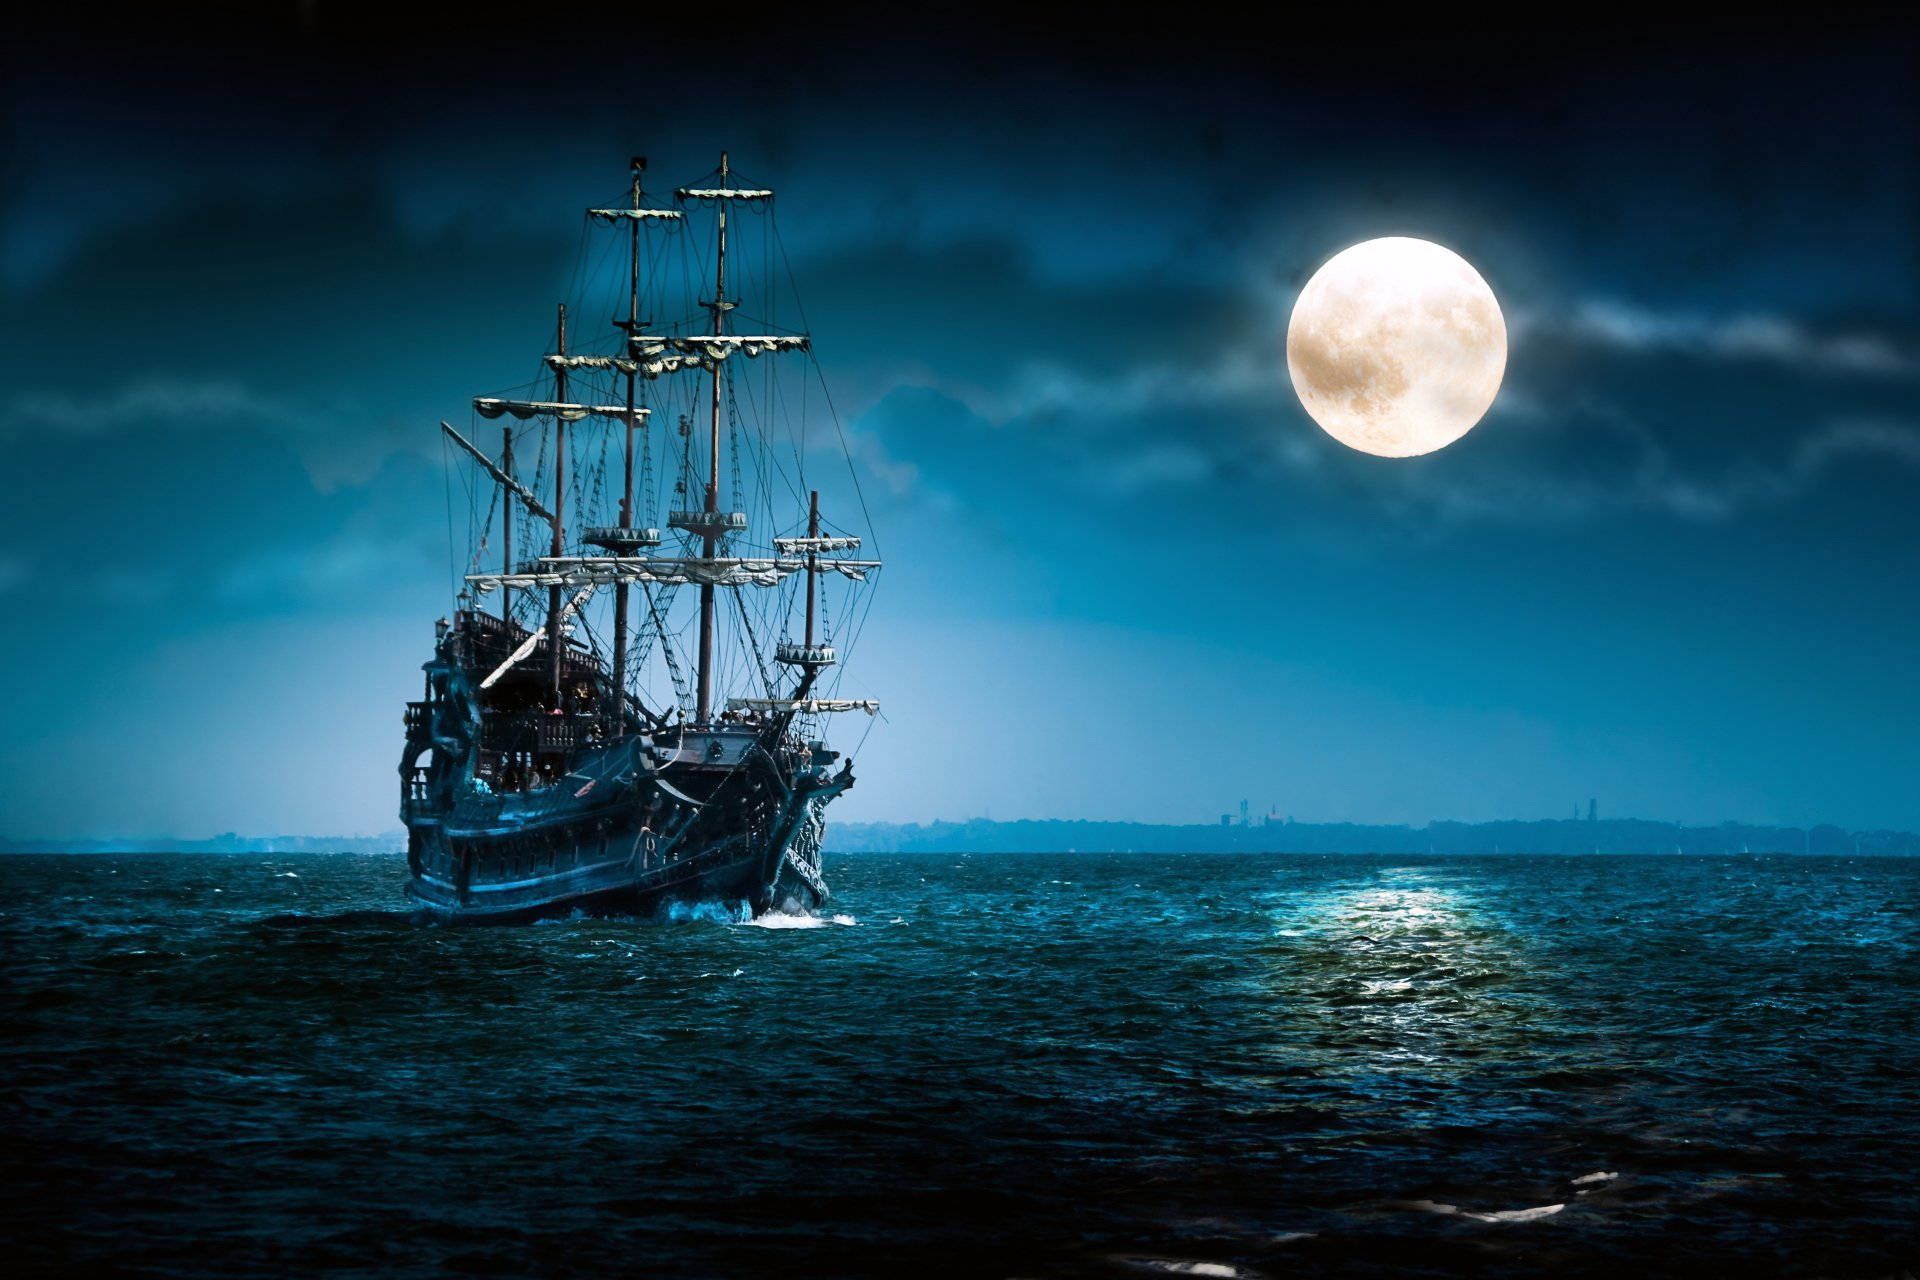 A ship is sailing in the ocean at night - Pirate